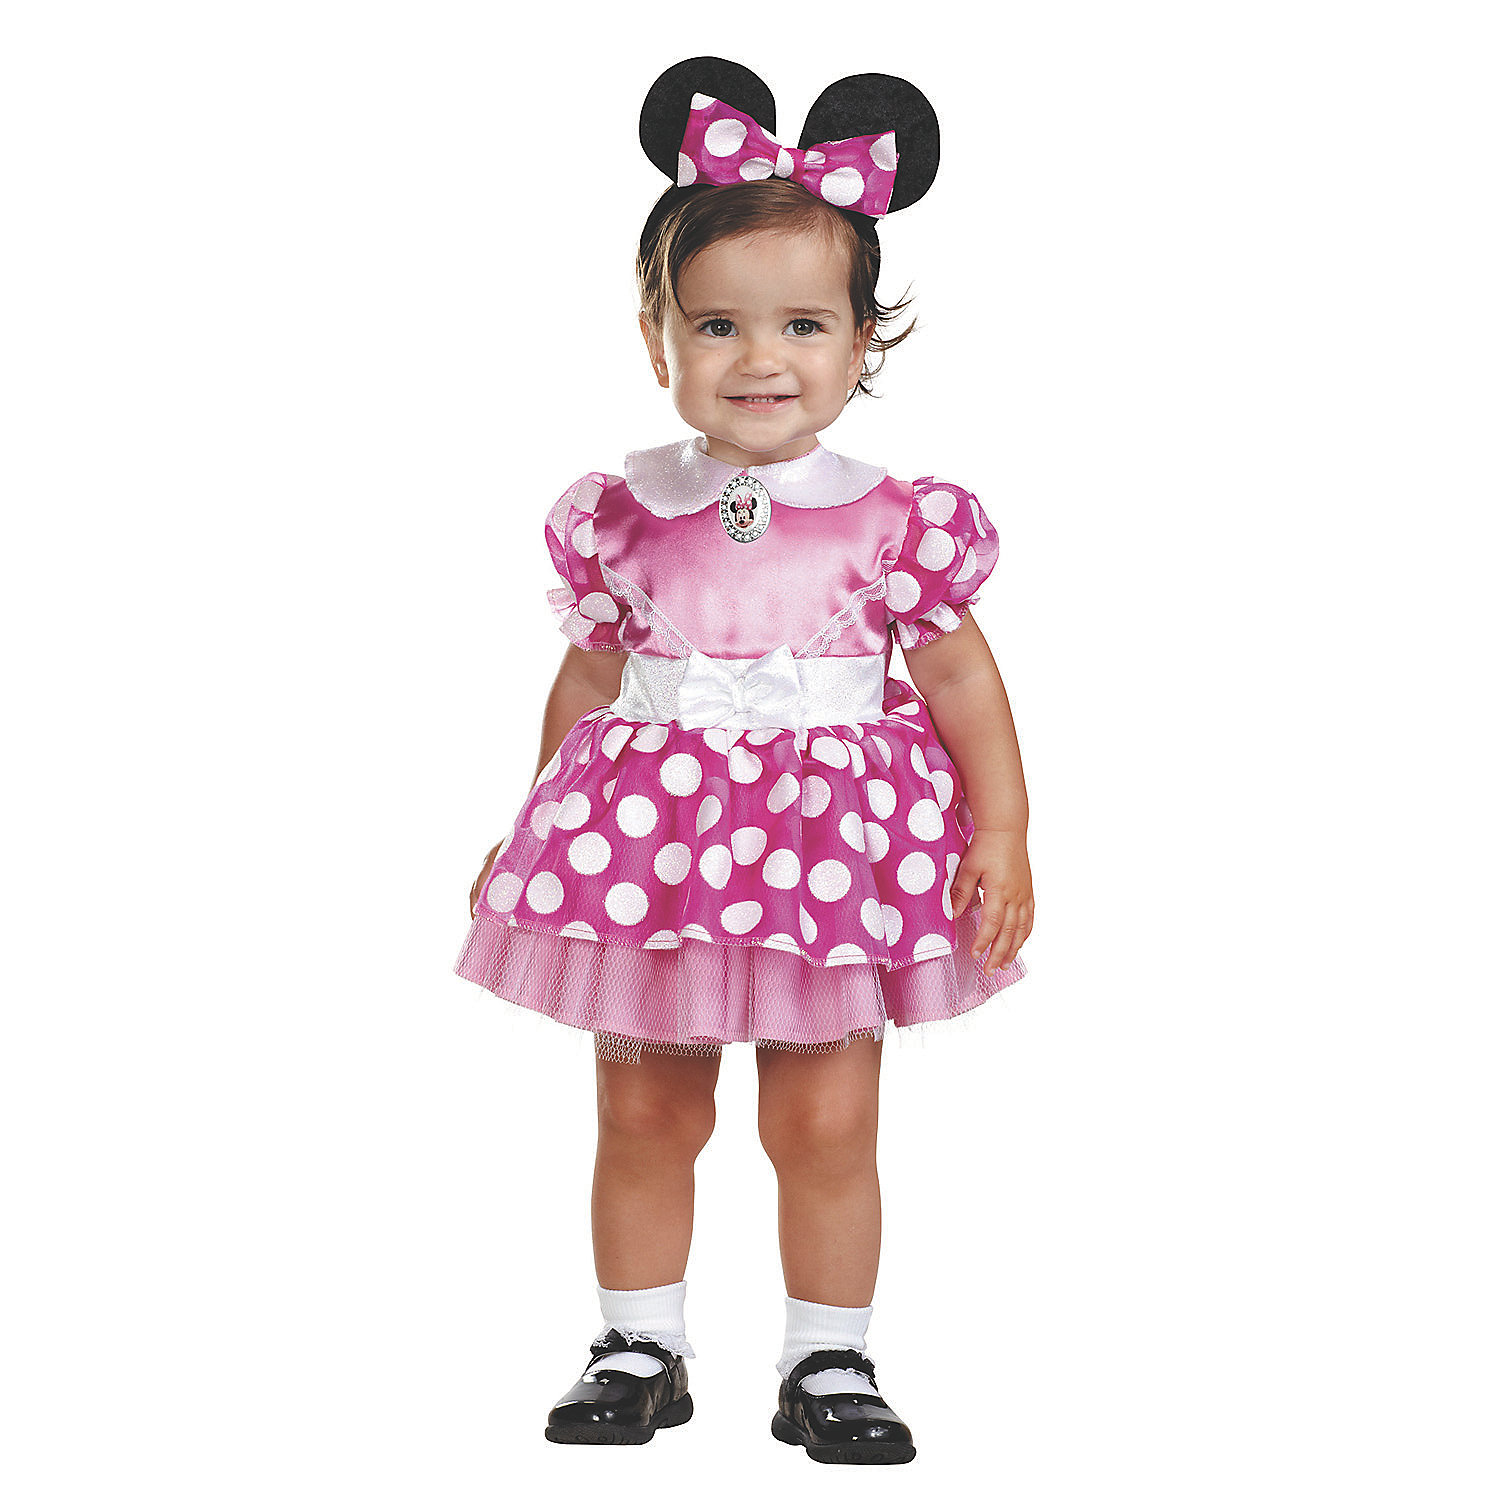 Disguise Toddler Girls' Minnie Mouse Costume - Size 12-18 Months - image 1 of 2